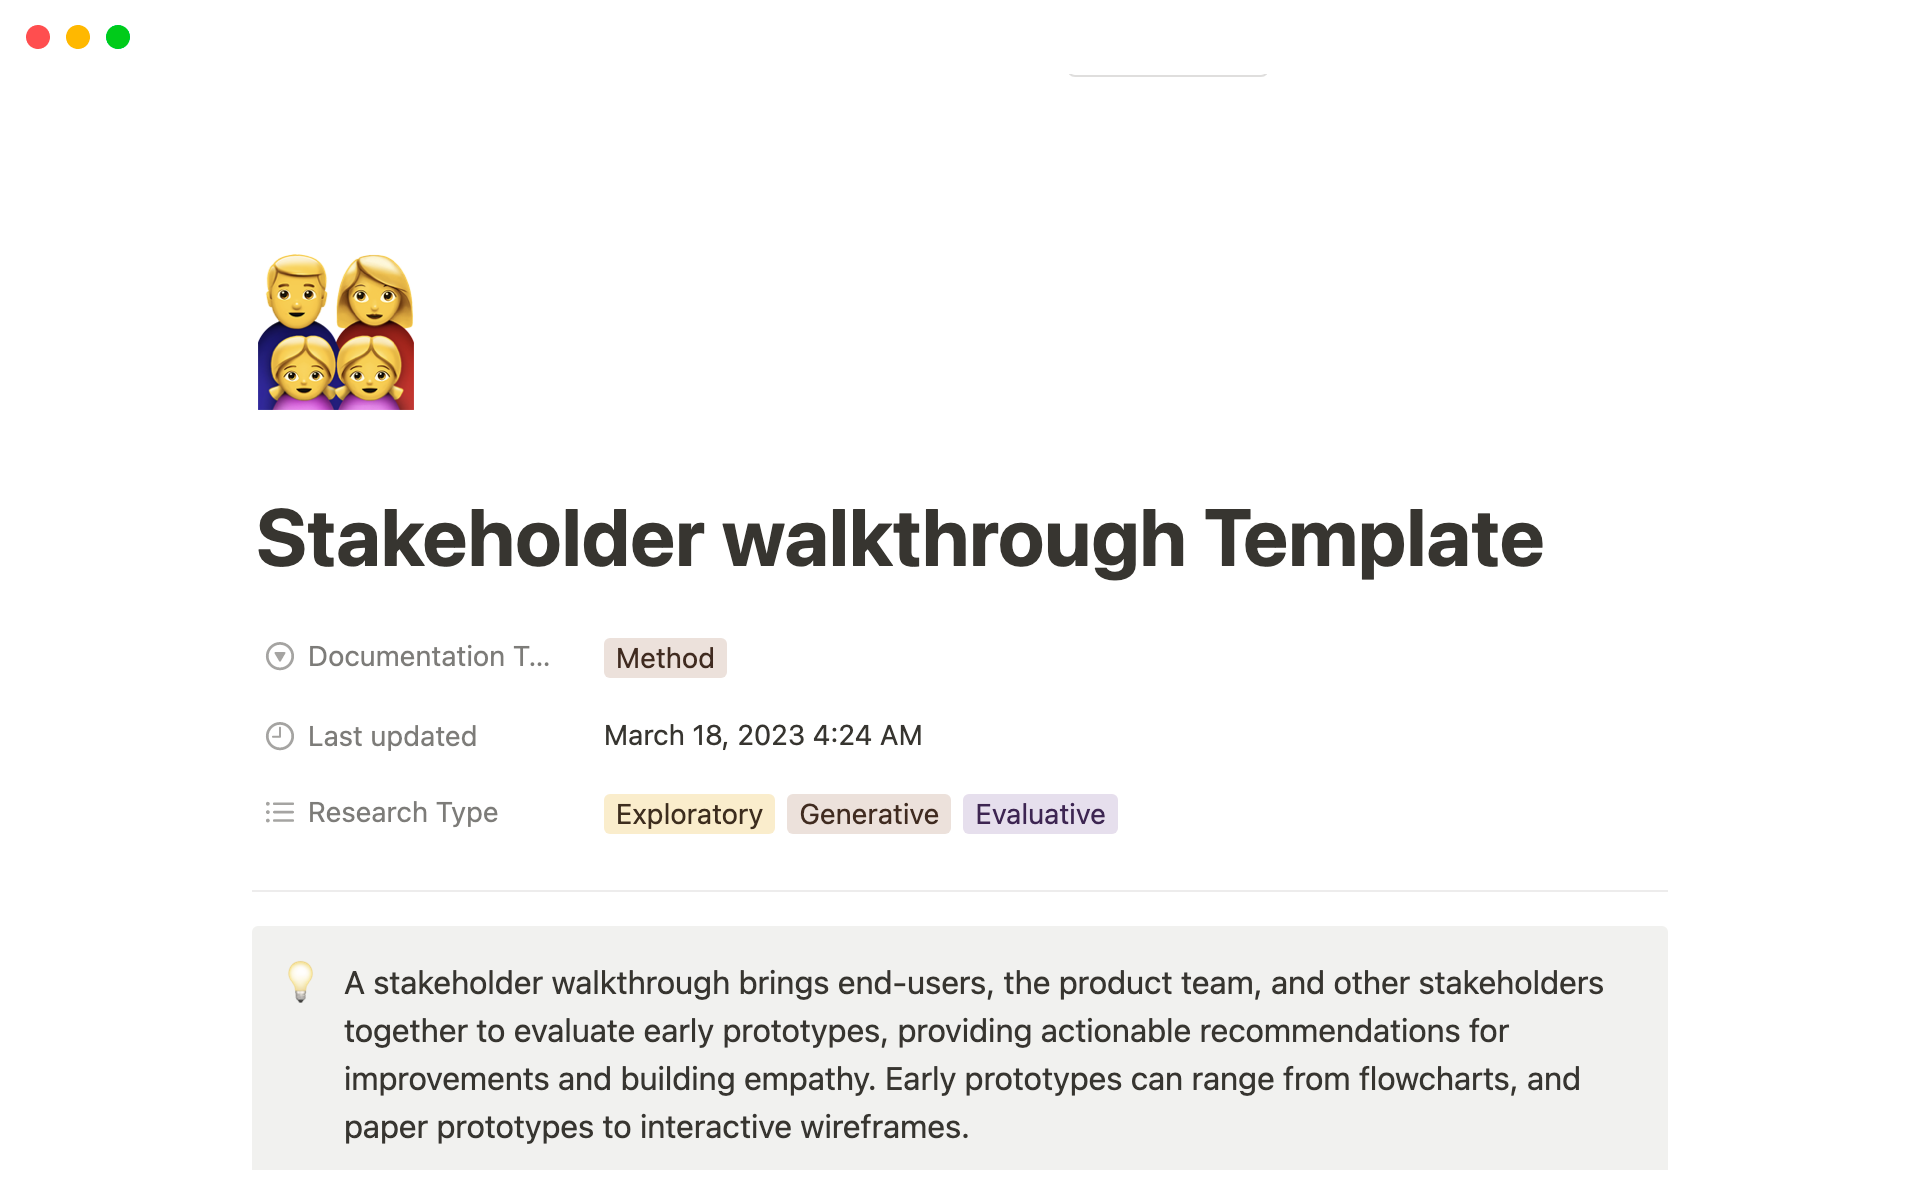 Screenshot of Top 10 Design Brief Templates for Product Development Managers collection by Notion